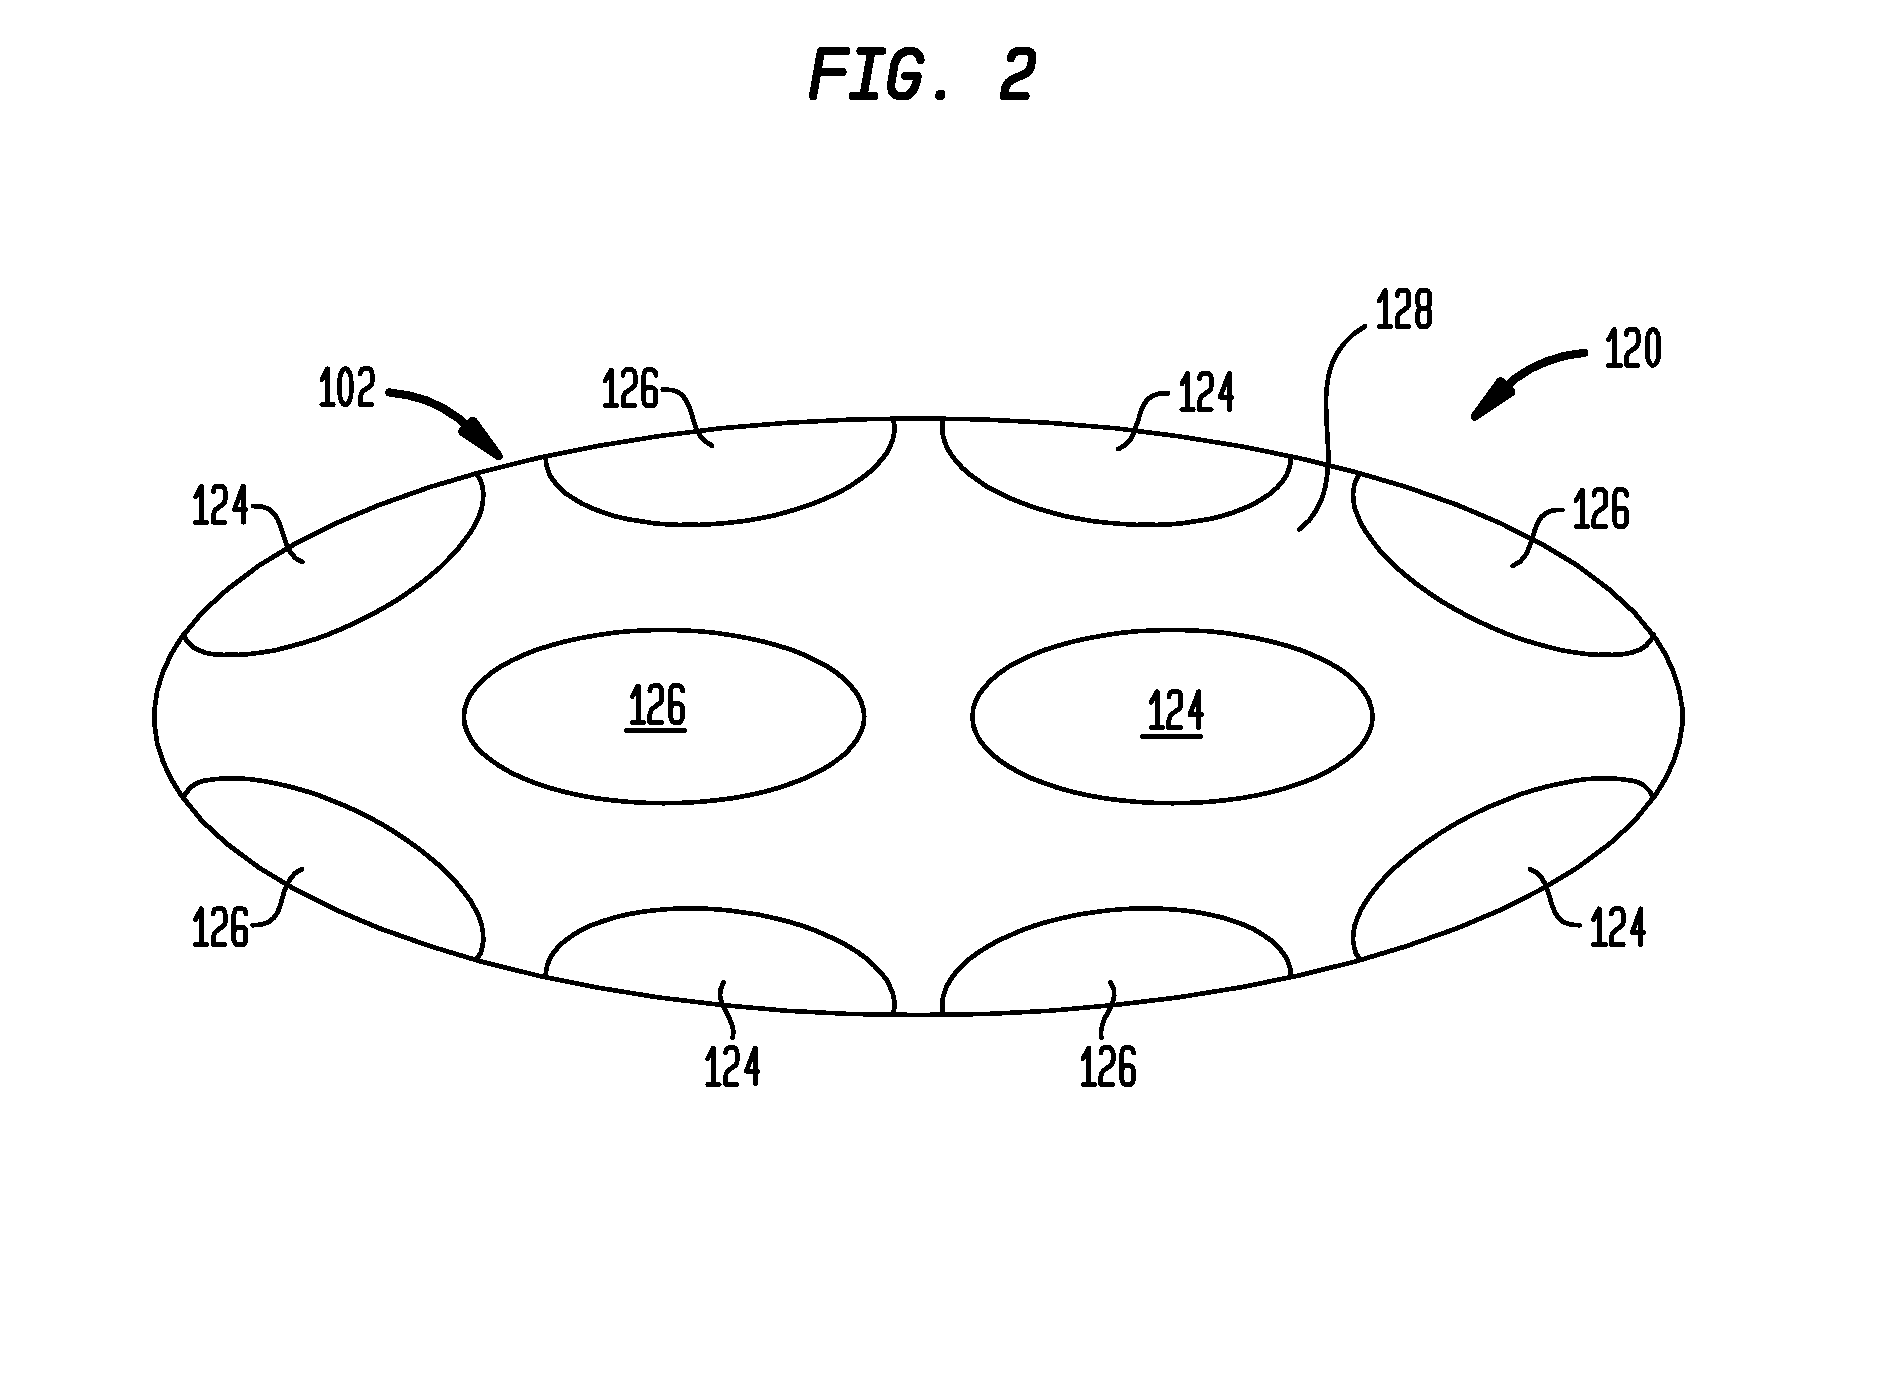 Methods and apparatus for treating gastrointestinal disorders using electrical signals